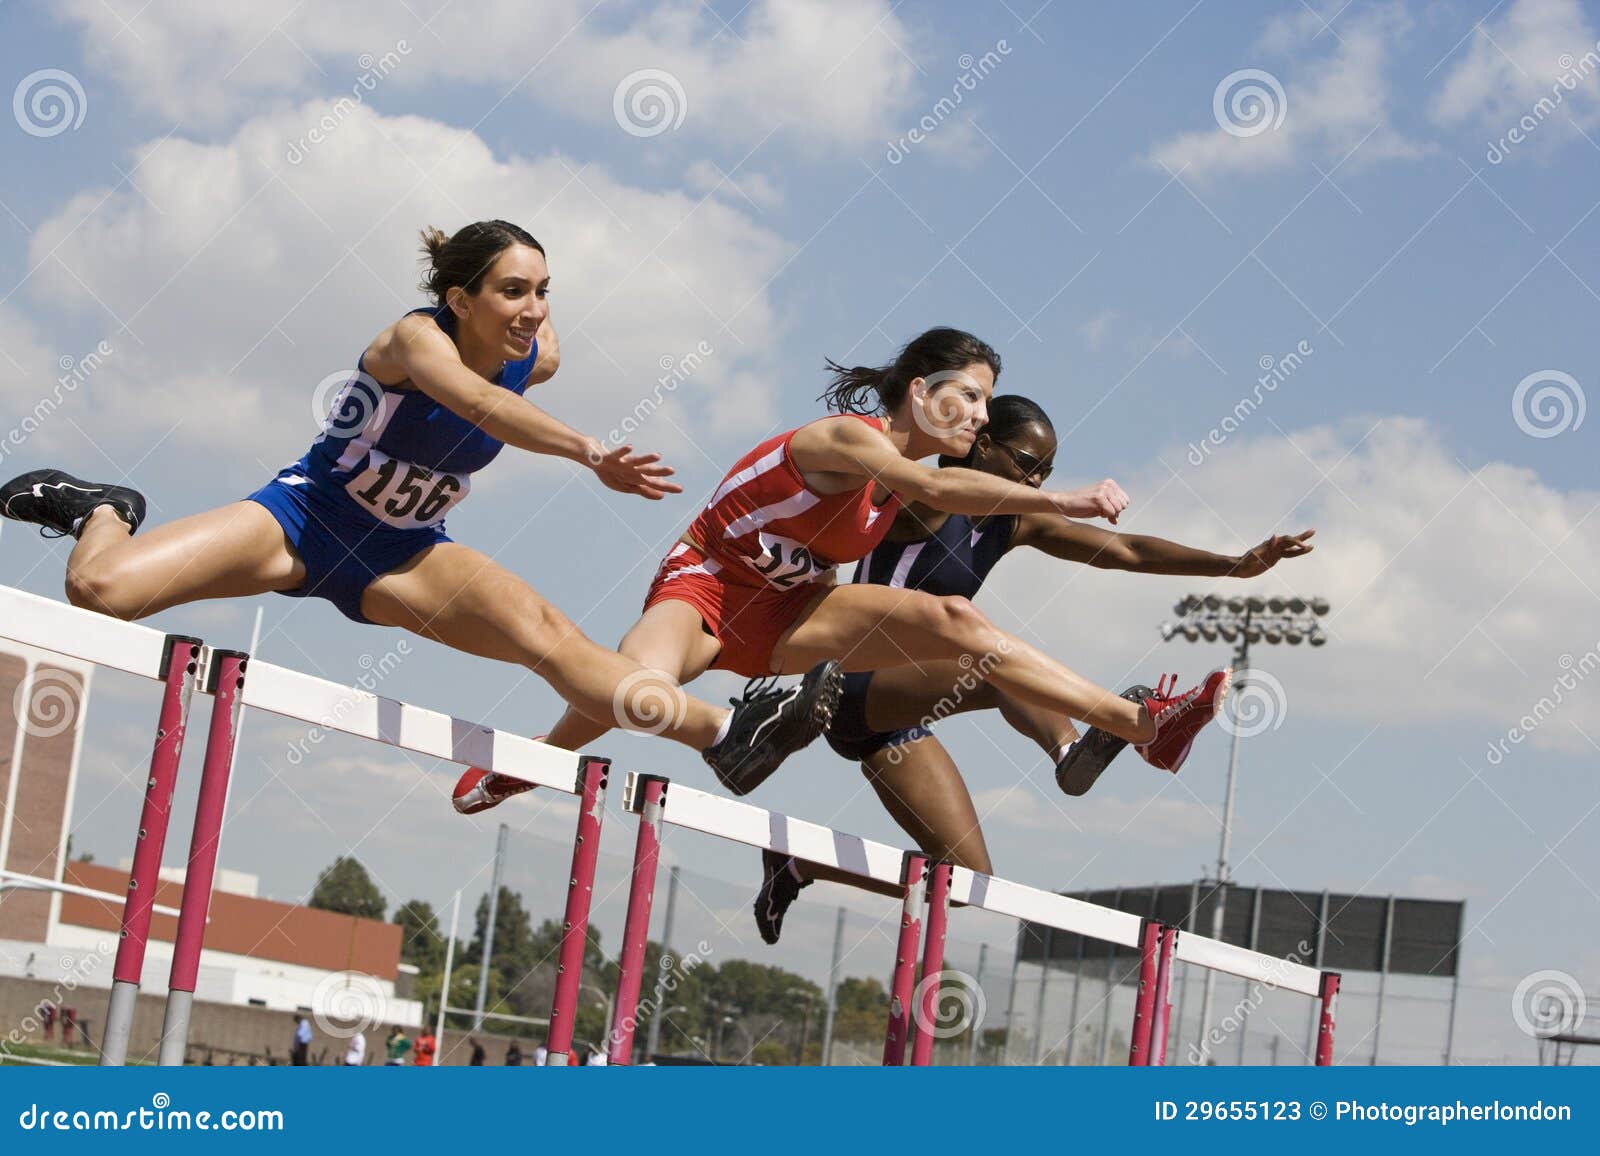 athletes clearing hurdles in race